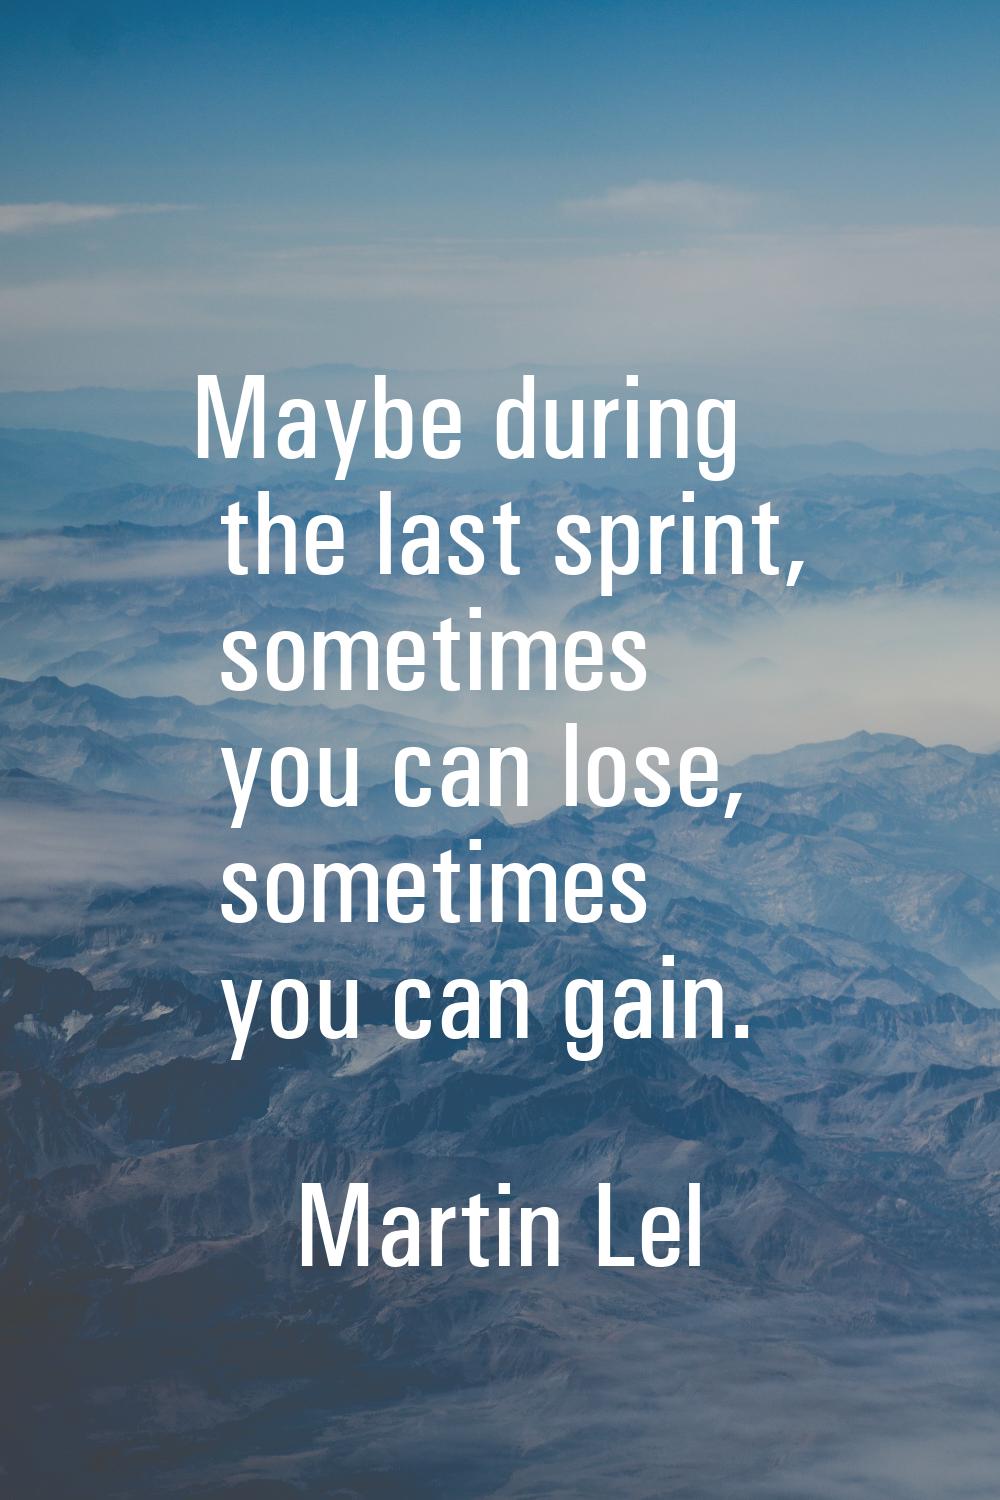 Maybe during the last sprint, sometimes you can lose, sometimes you can gain.